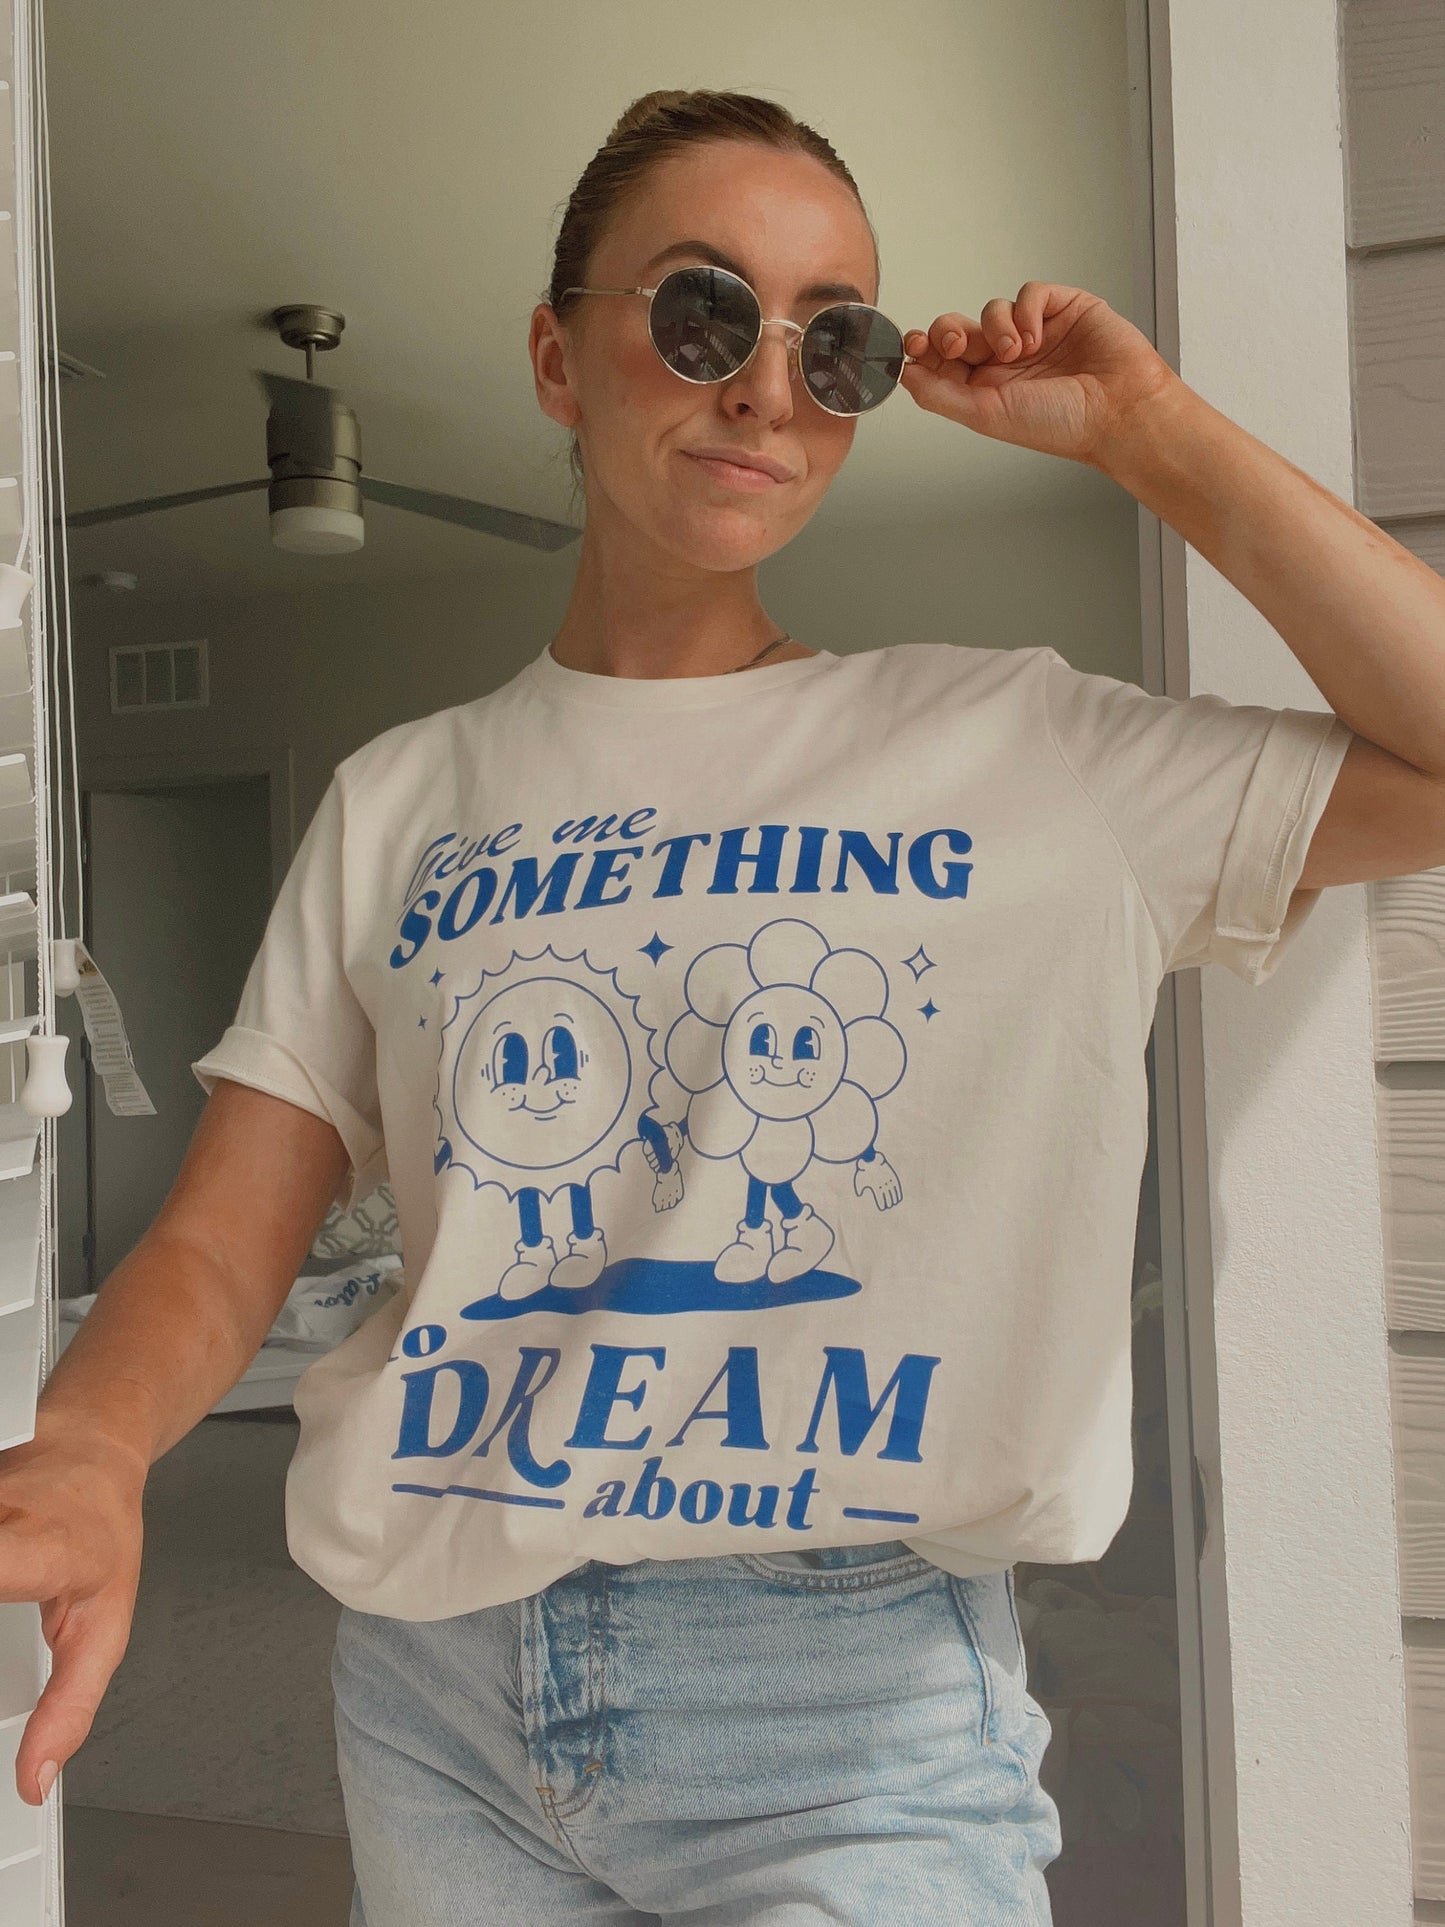 give me something to dream about // Daydreaming Tee // Harry's House Aesthetic Shirt